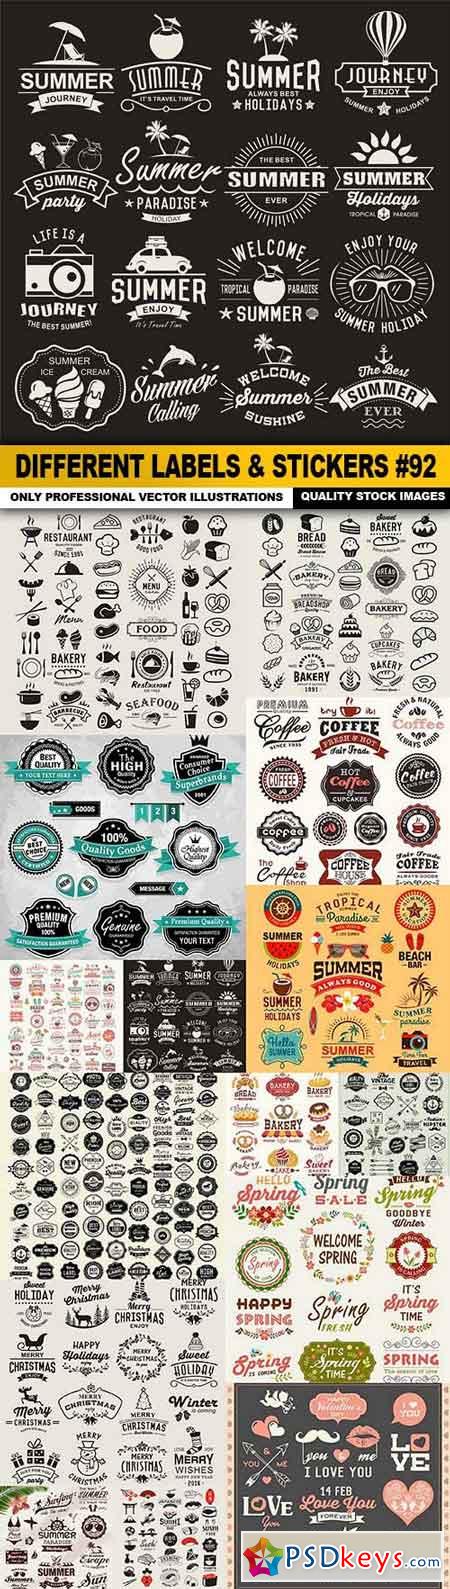 Different Labels & Stickers #92 - 15 Vector